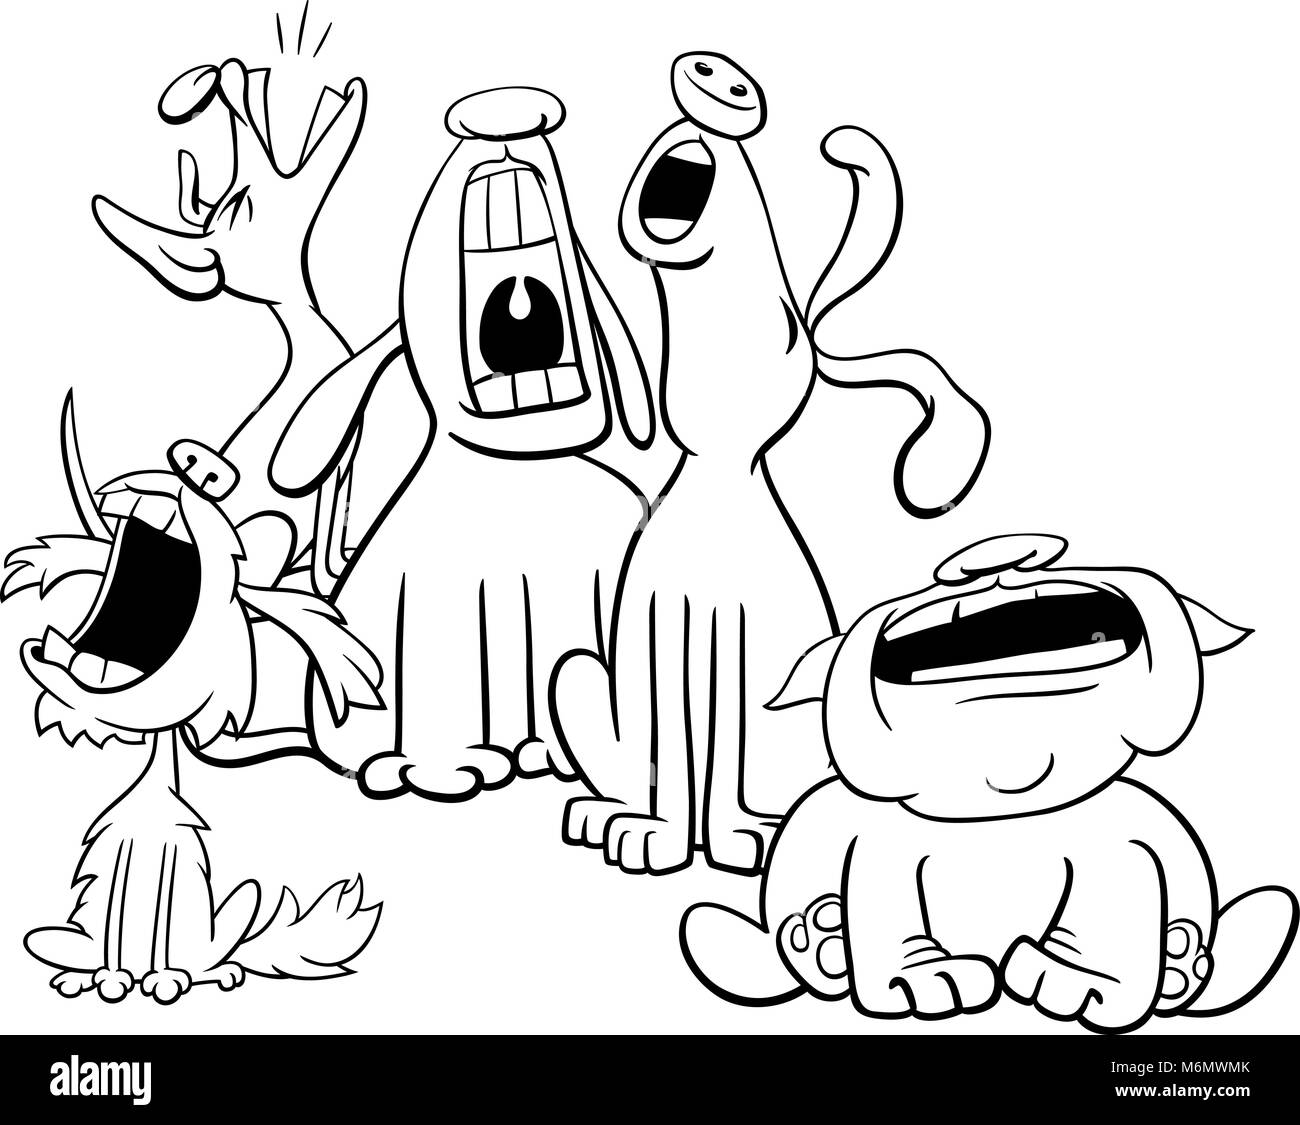 Black and White Cartoon Illustration of Dogs Animal Characters Group Barking or Howling Coloring Book Stock Vector